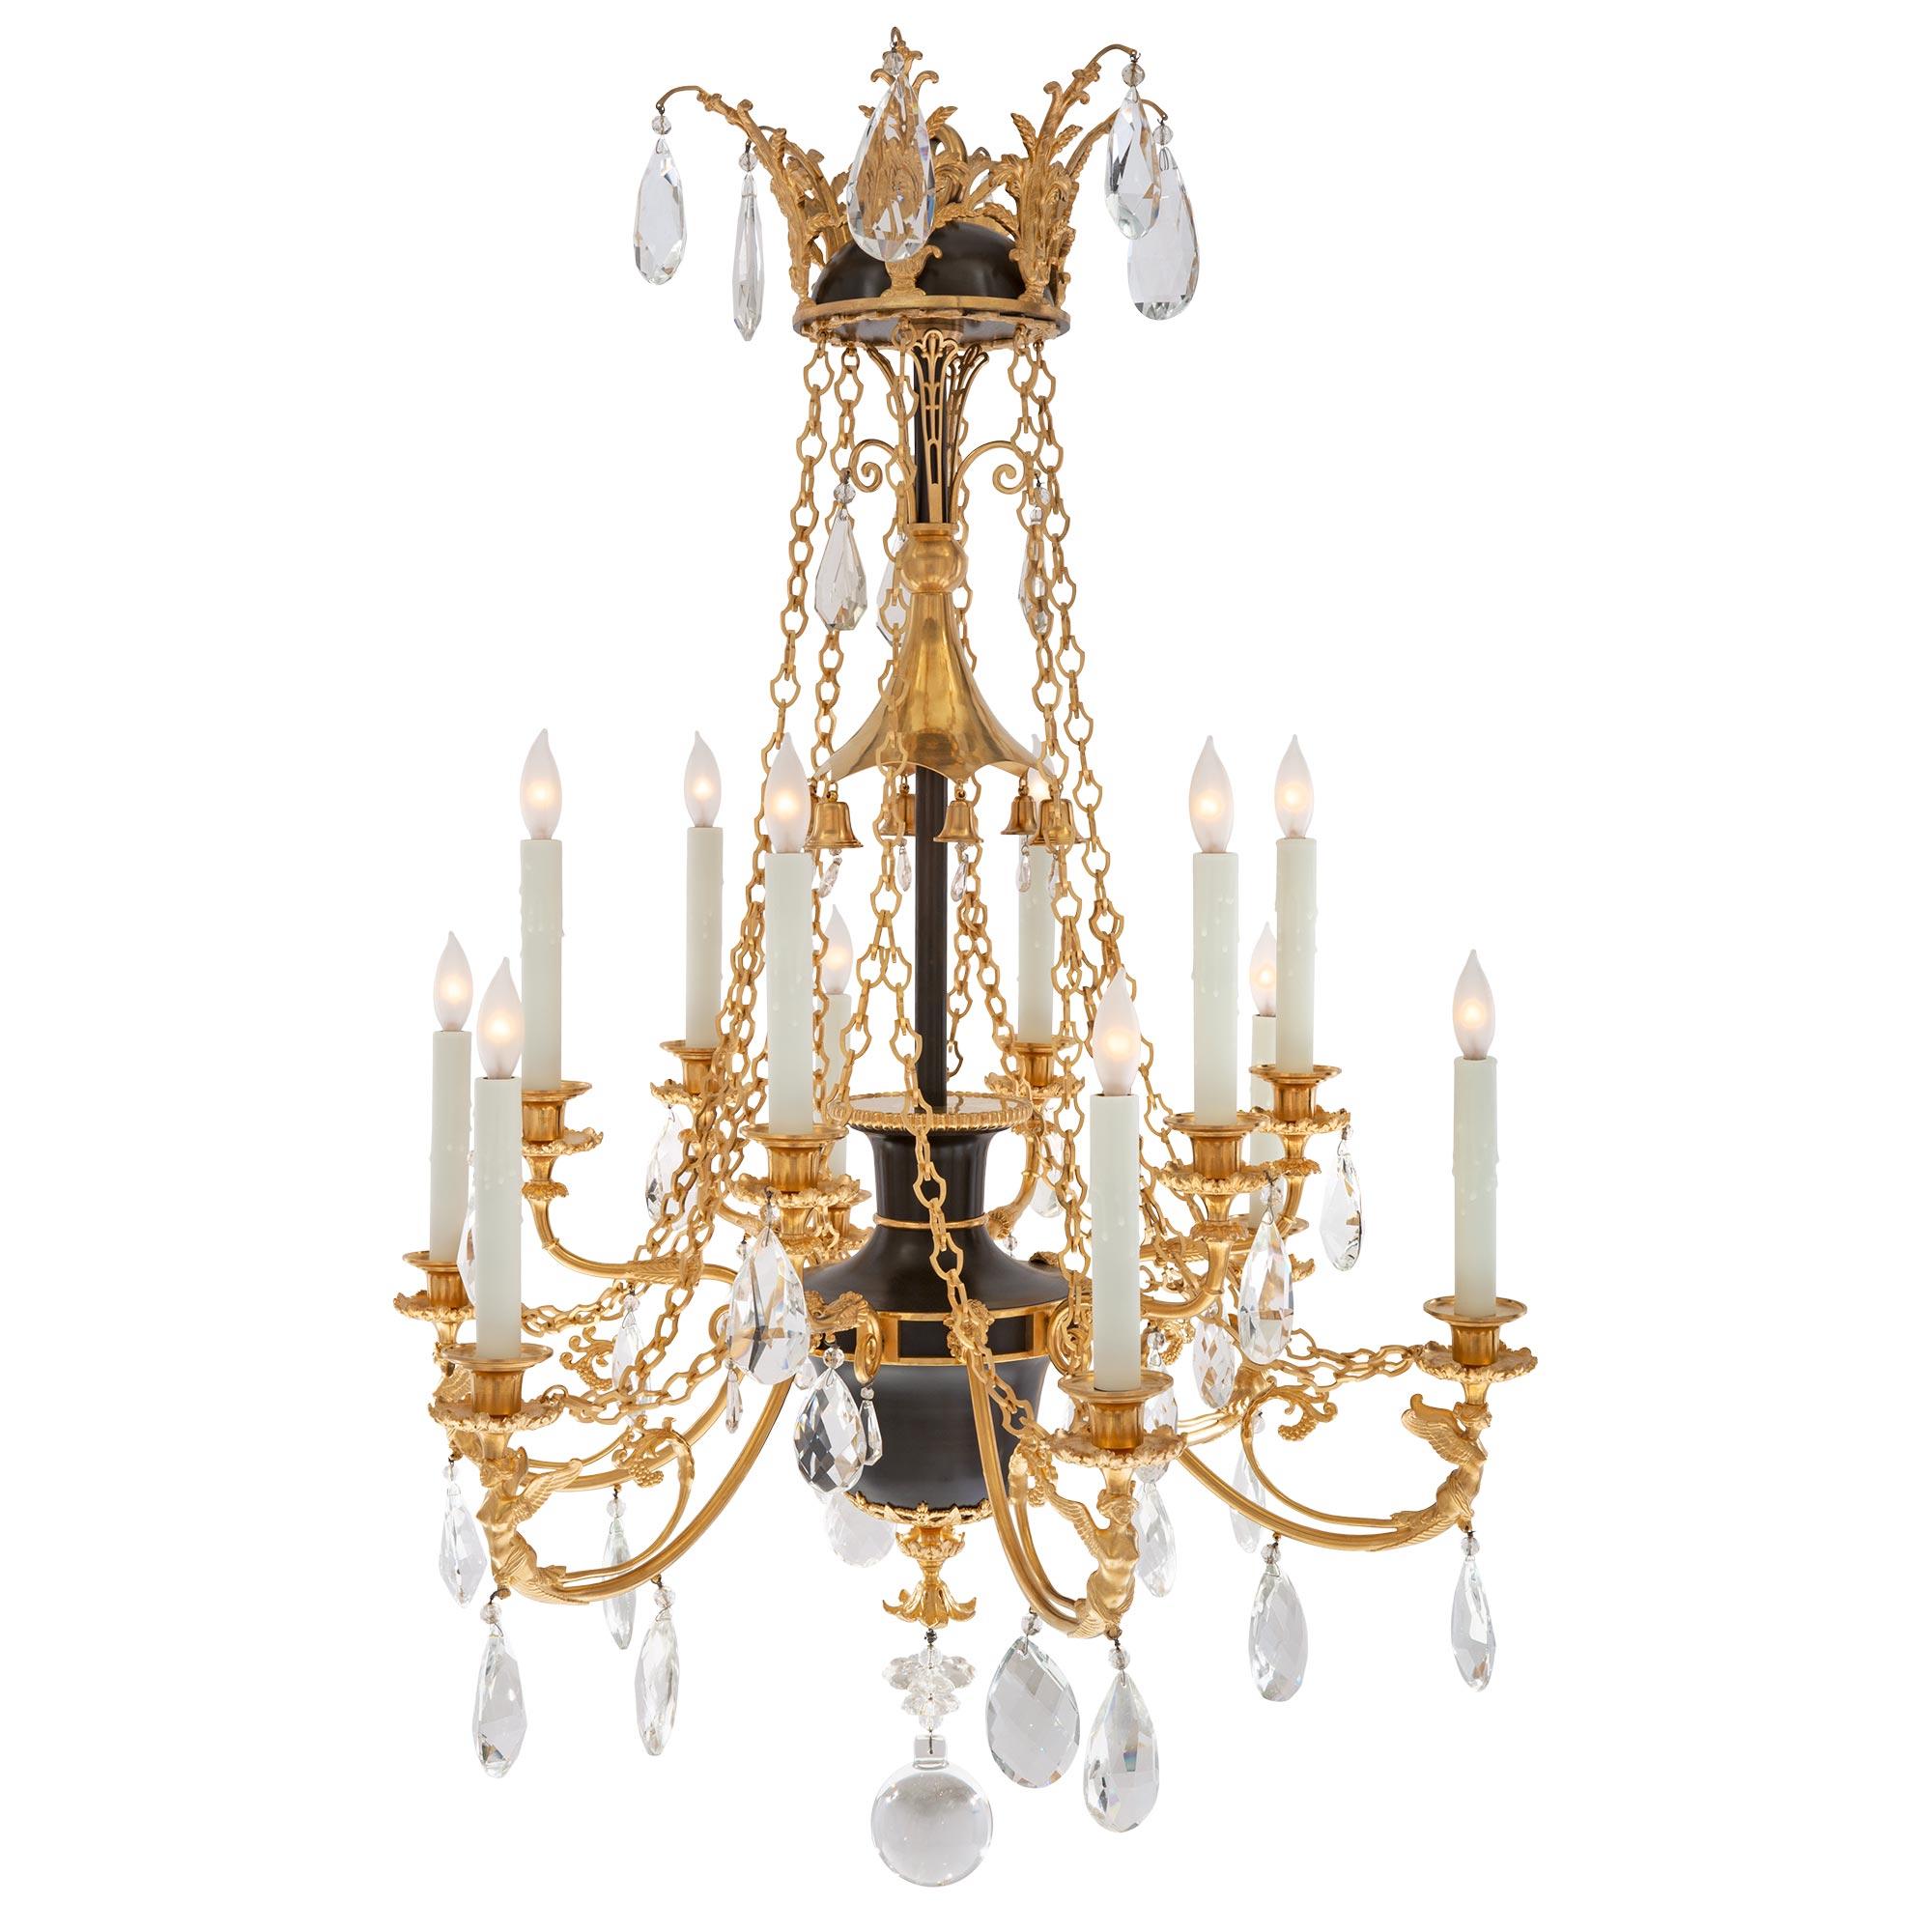 A sensational and extremely decorative Russian 19th century Empire st. patinated bronze, crystal, and ormolu chandelier. The twelve arm chandelier is centered by a Fine solid crystal ball below a richly chased inverted ormolu floral finial and